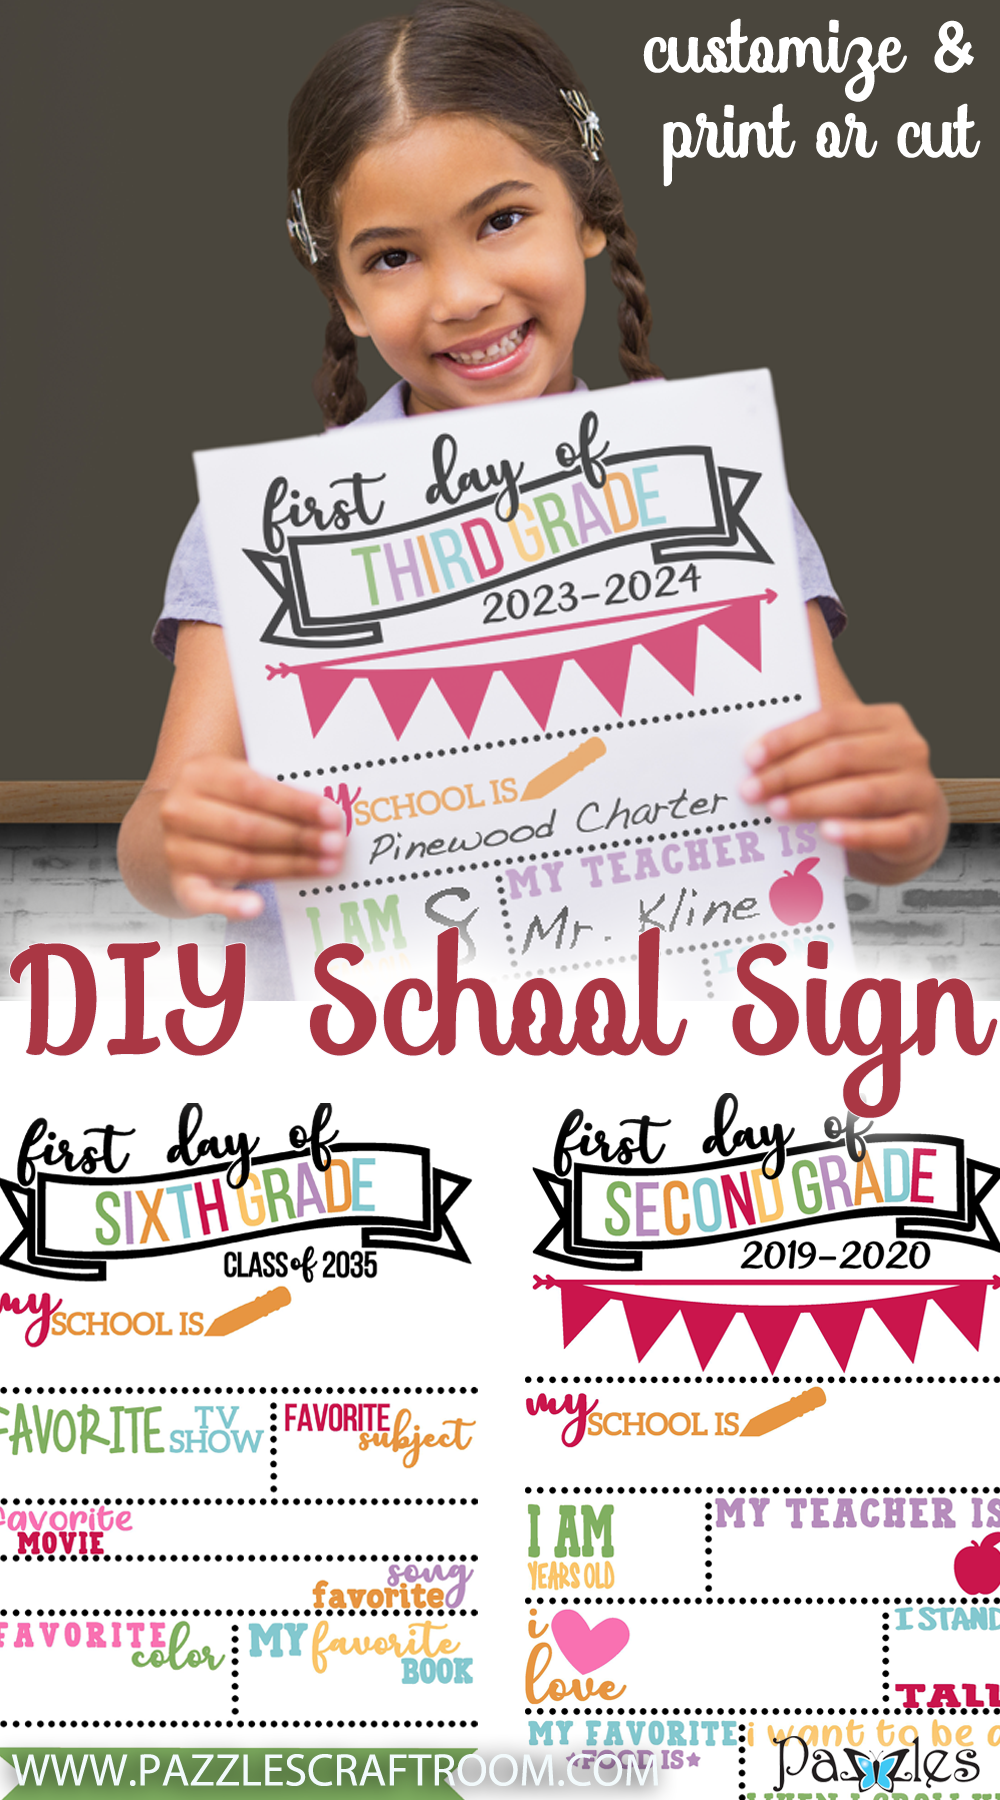 Pazzles DIY Quick and Easy Customizable First Day of School Sign